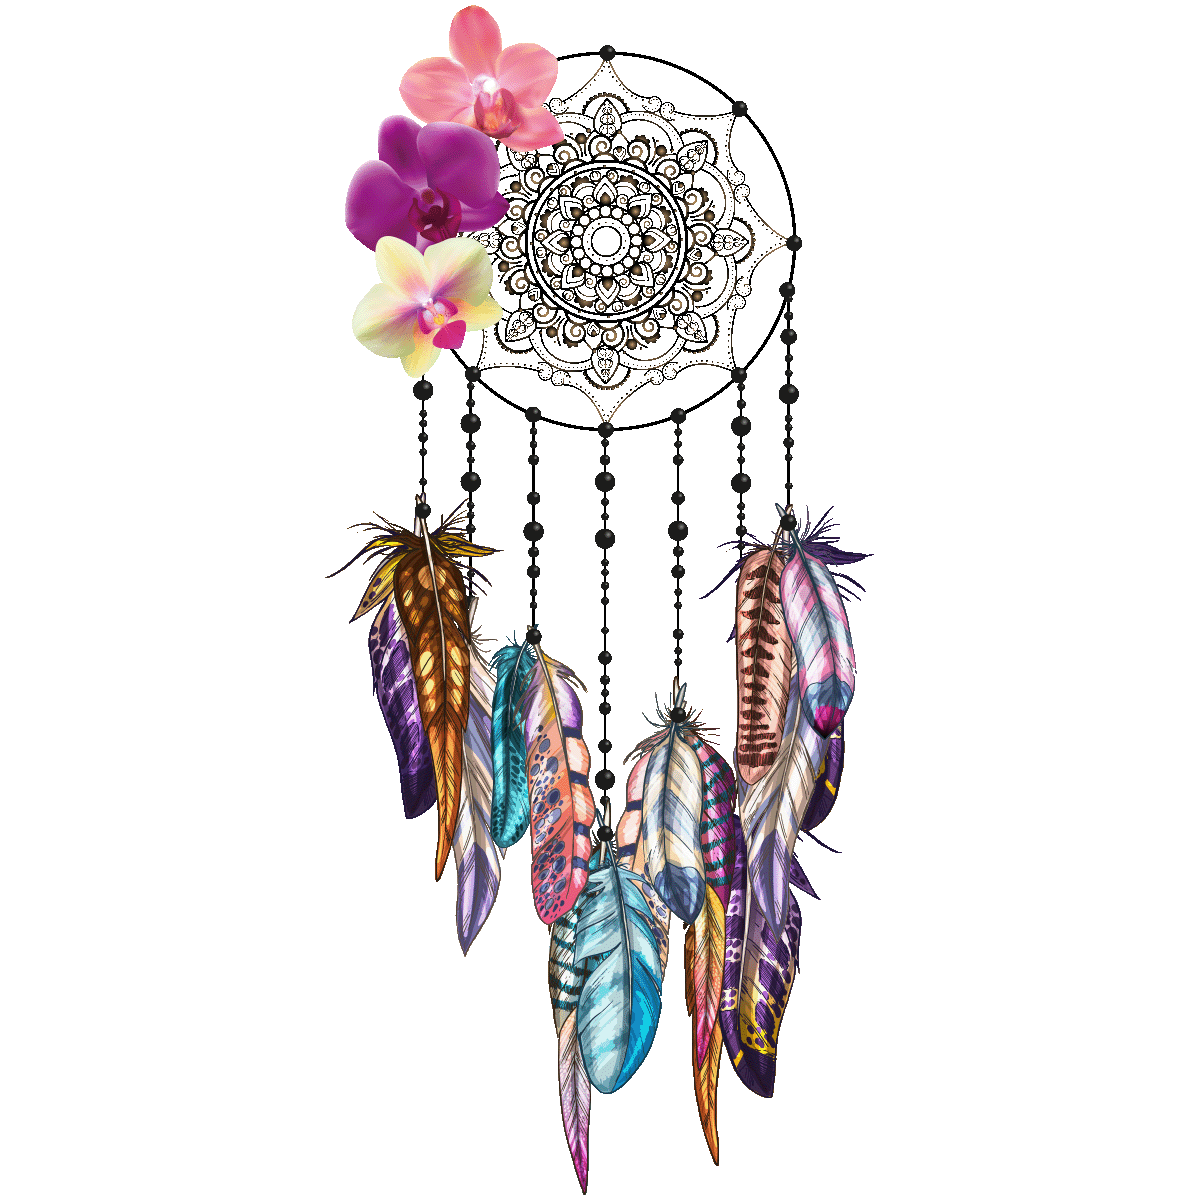 Wall Sticker Dreamcatcher Decal Orchids Free HQ Image PNG Image